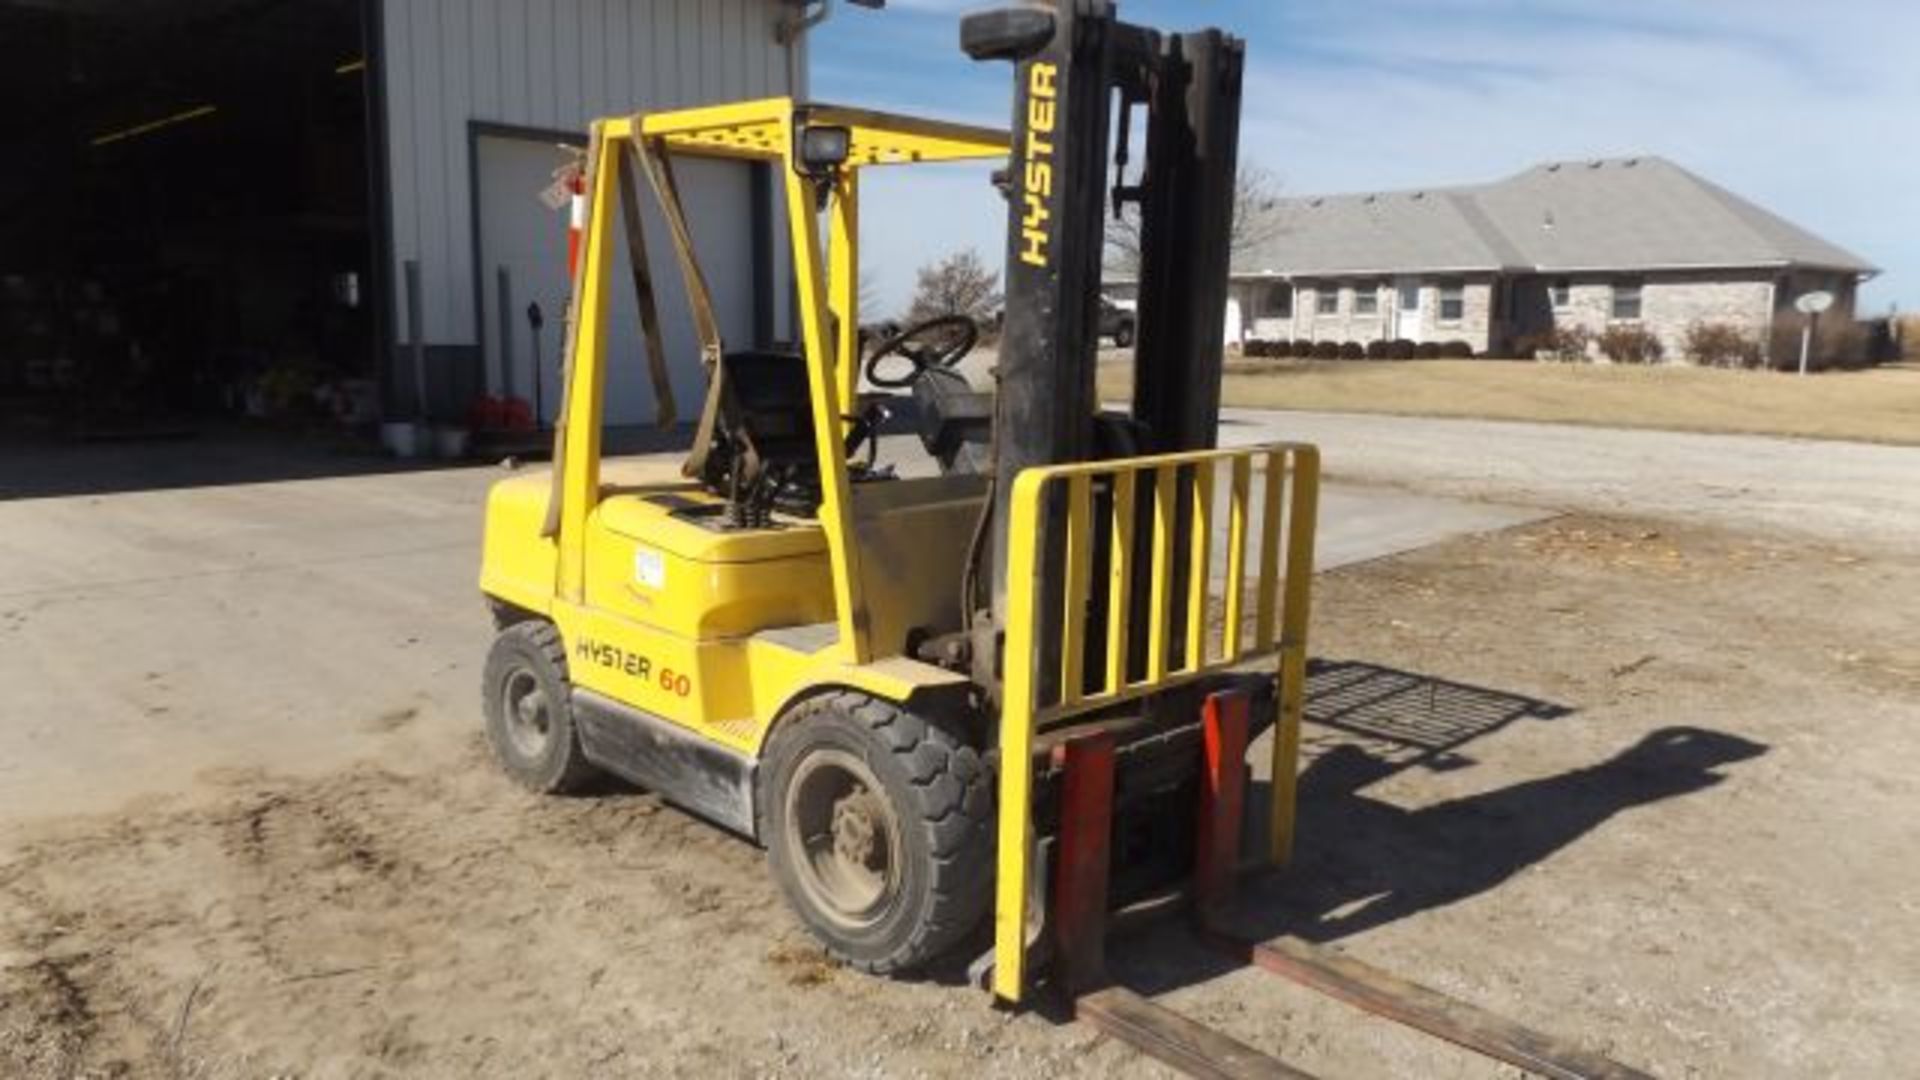 Hyster 60 Fork Lift 1029 hrs, Gas, 3 Stage Low-Profile Mast, 48" Forks, 6000# Capacity - Image 3 of 4